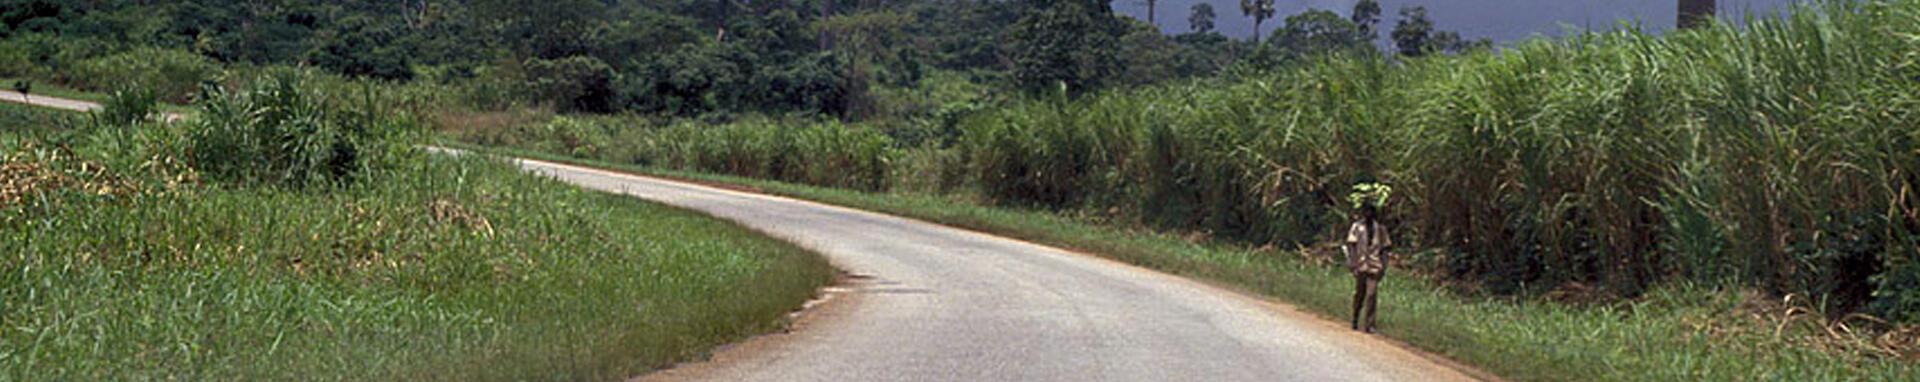 World Bank Photo Collection View of rural road with forest in the background. Ghana. Photo: Curt Carnemark / World Bank